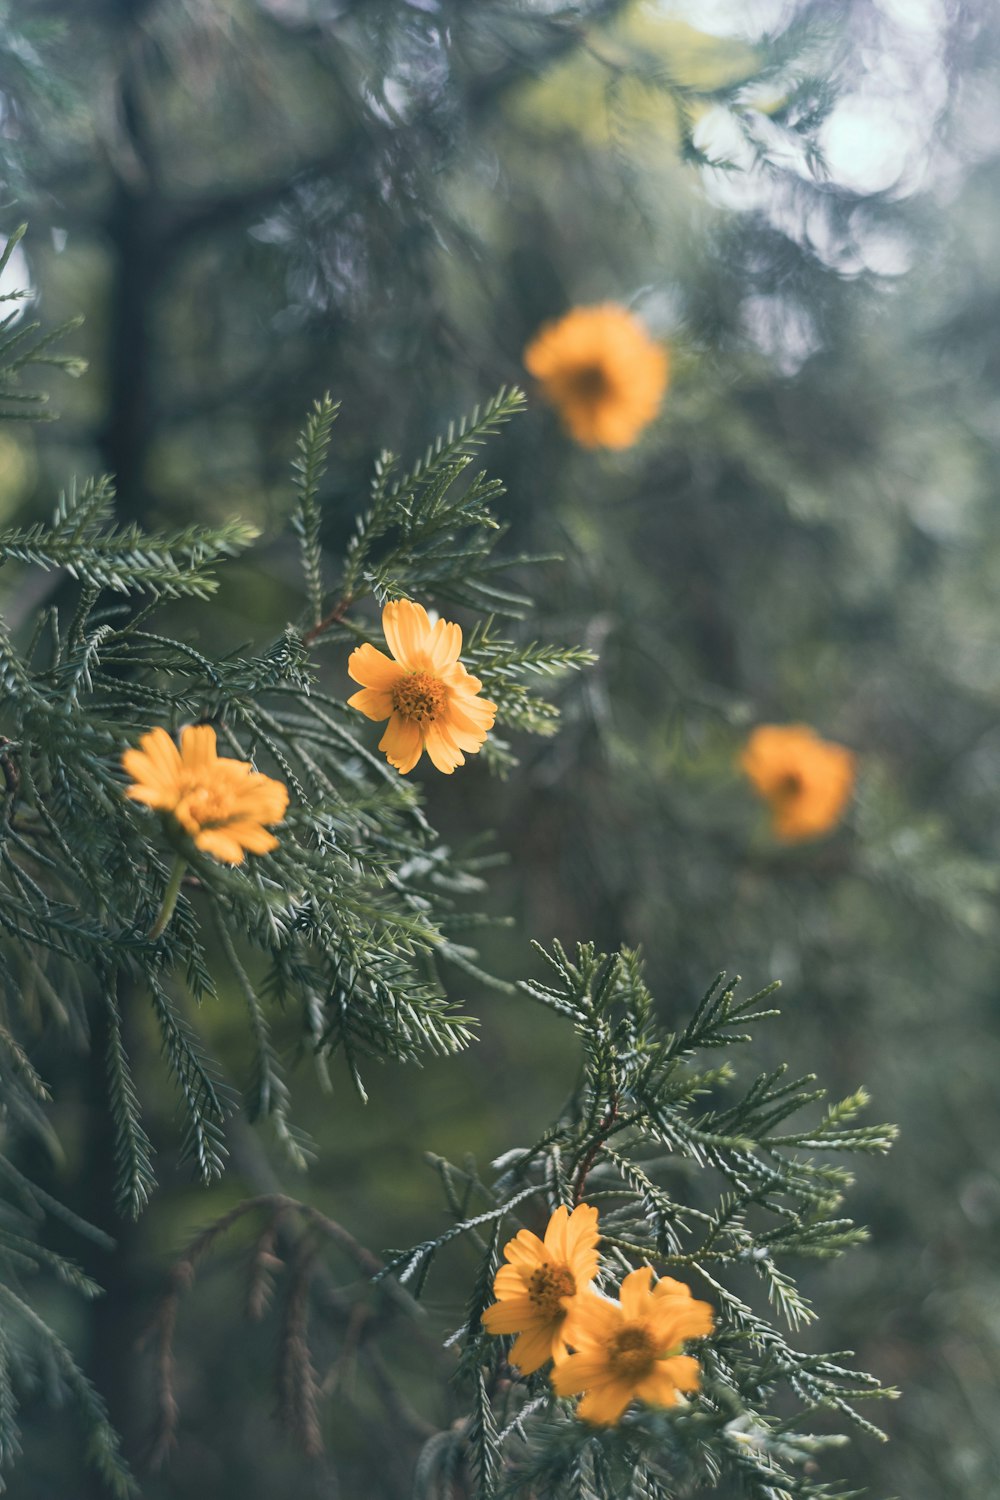 a close up of a pine tree with yellow flowers